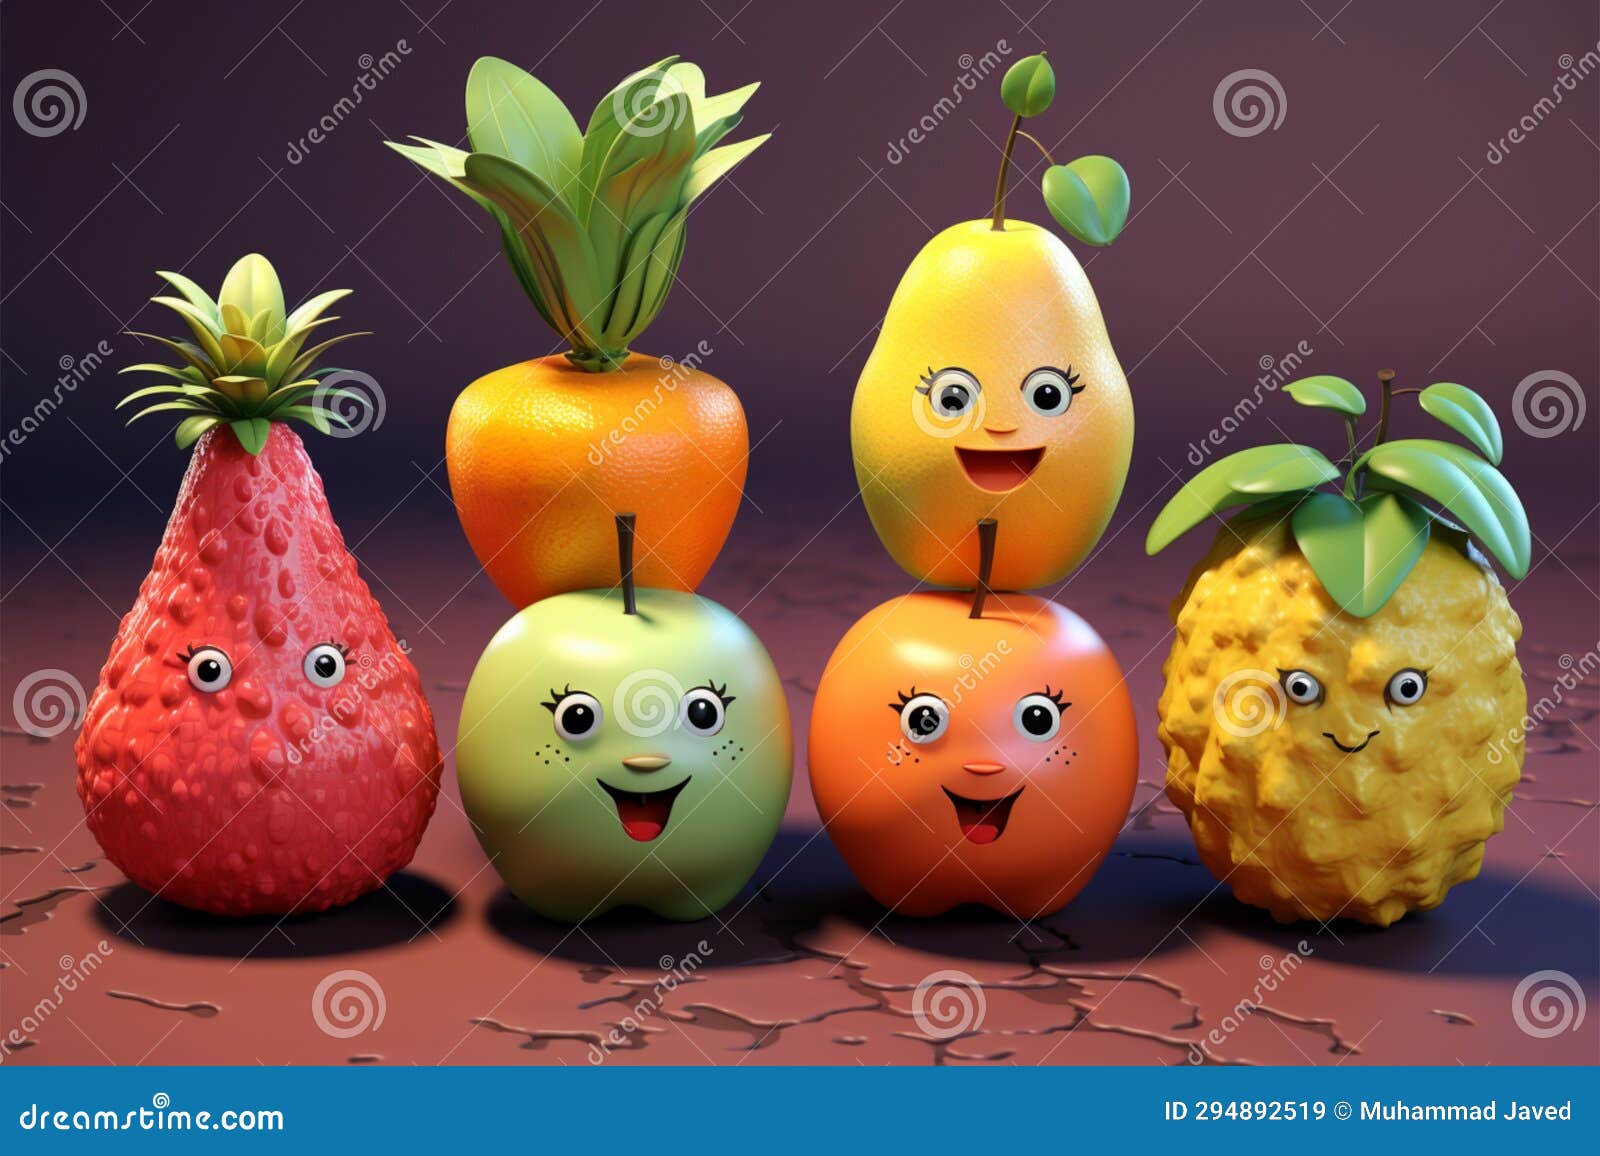 Playful Fruit Characters in a Series, Perfect for Various Projects ...